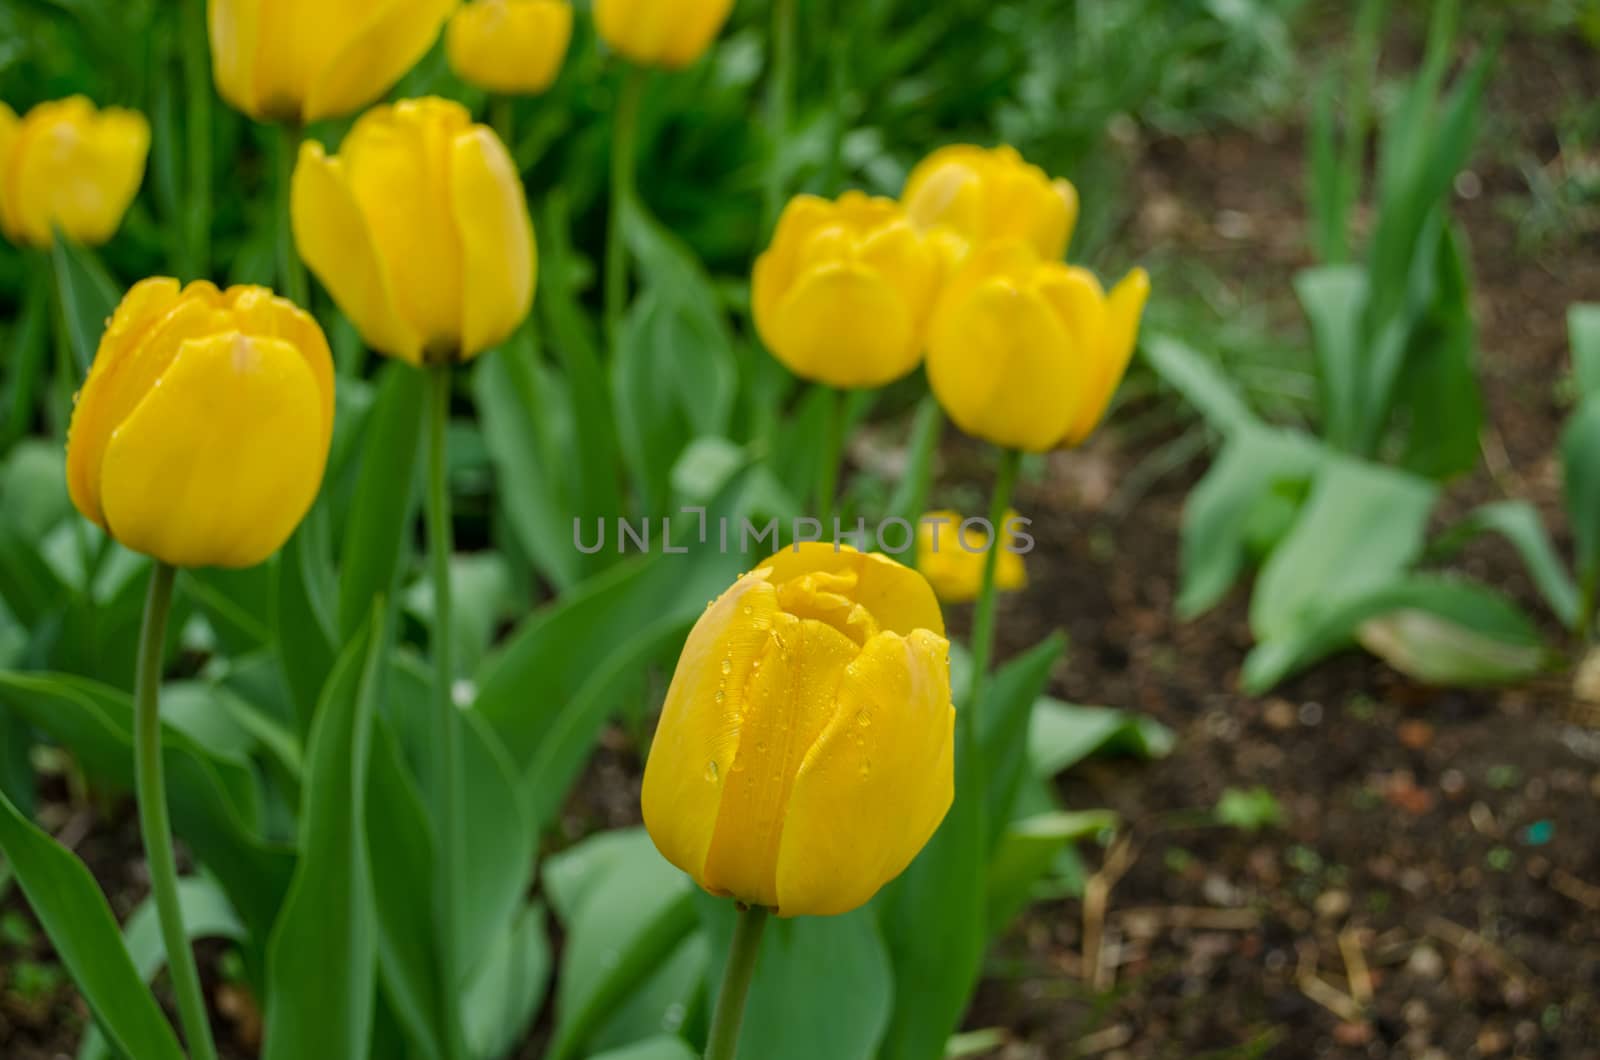 yellow tulip flower with green leaves grow in the garden